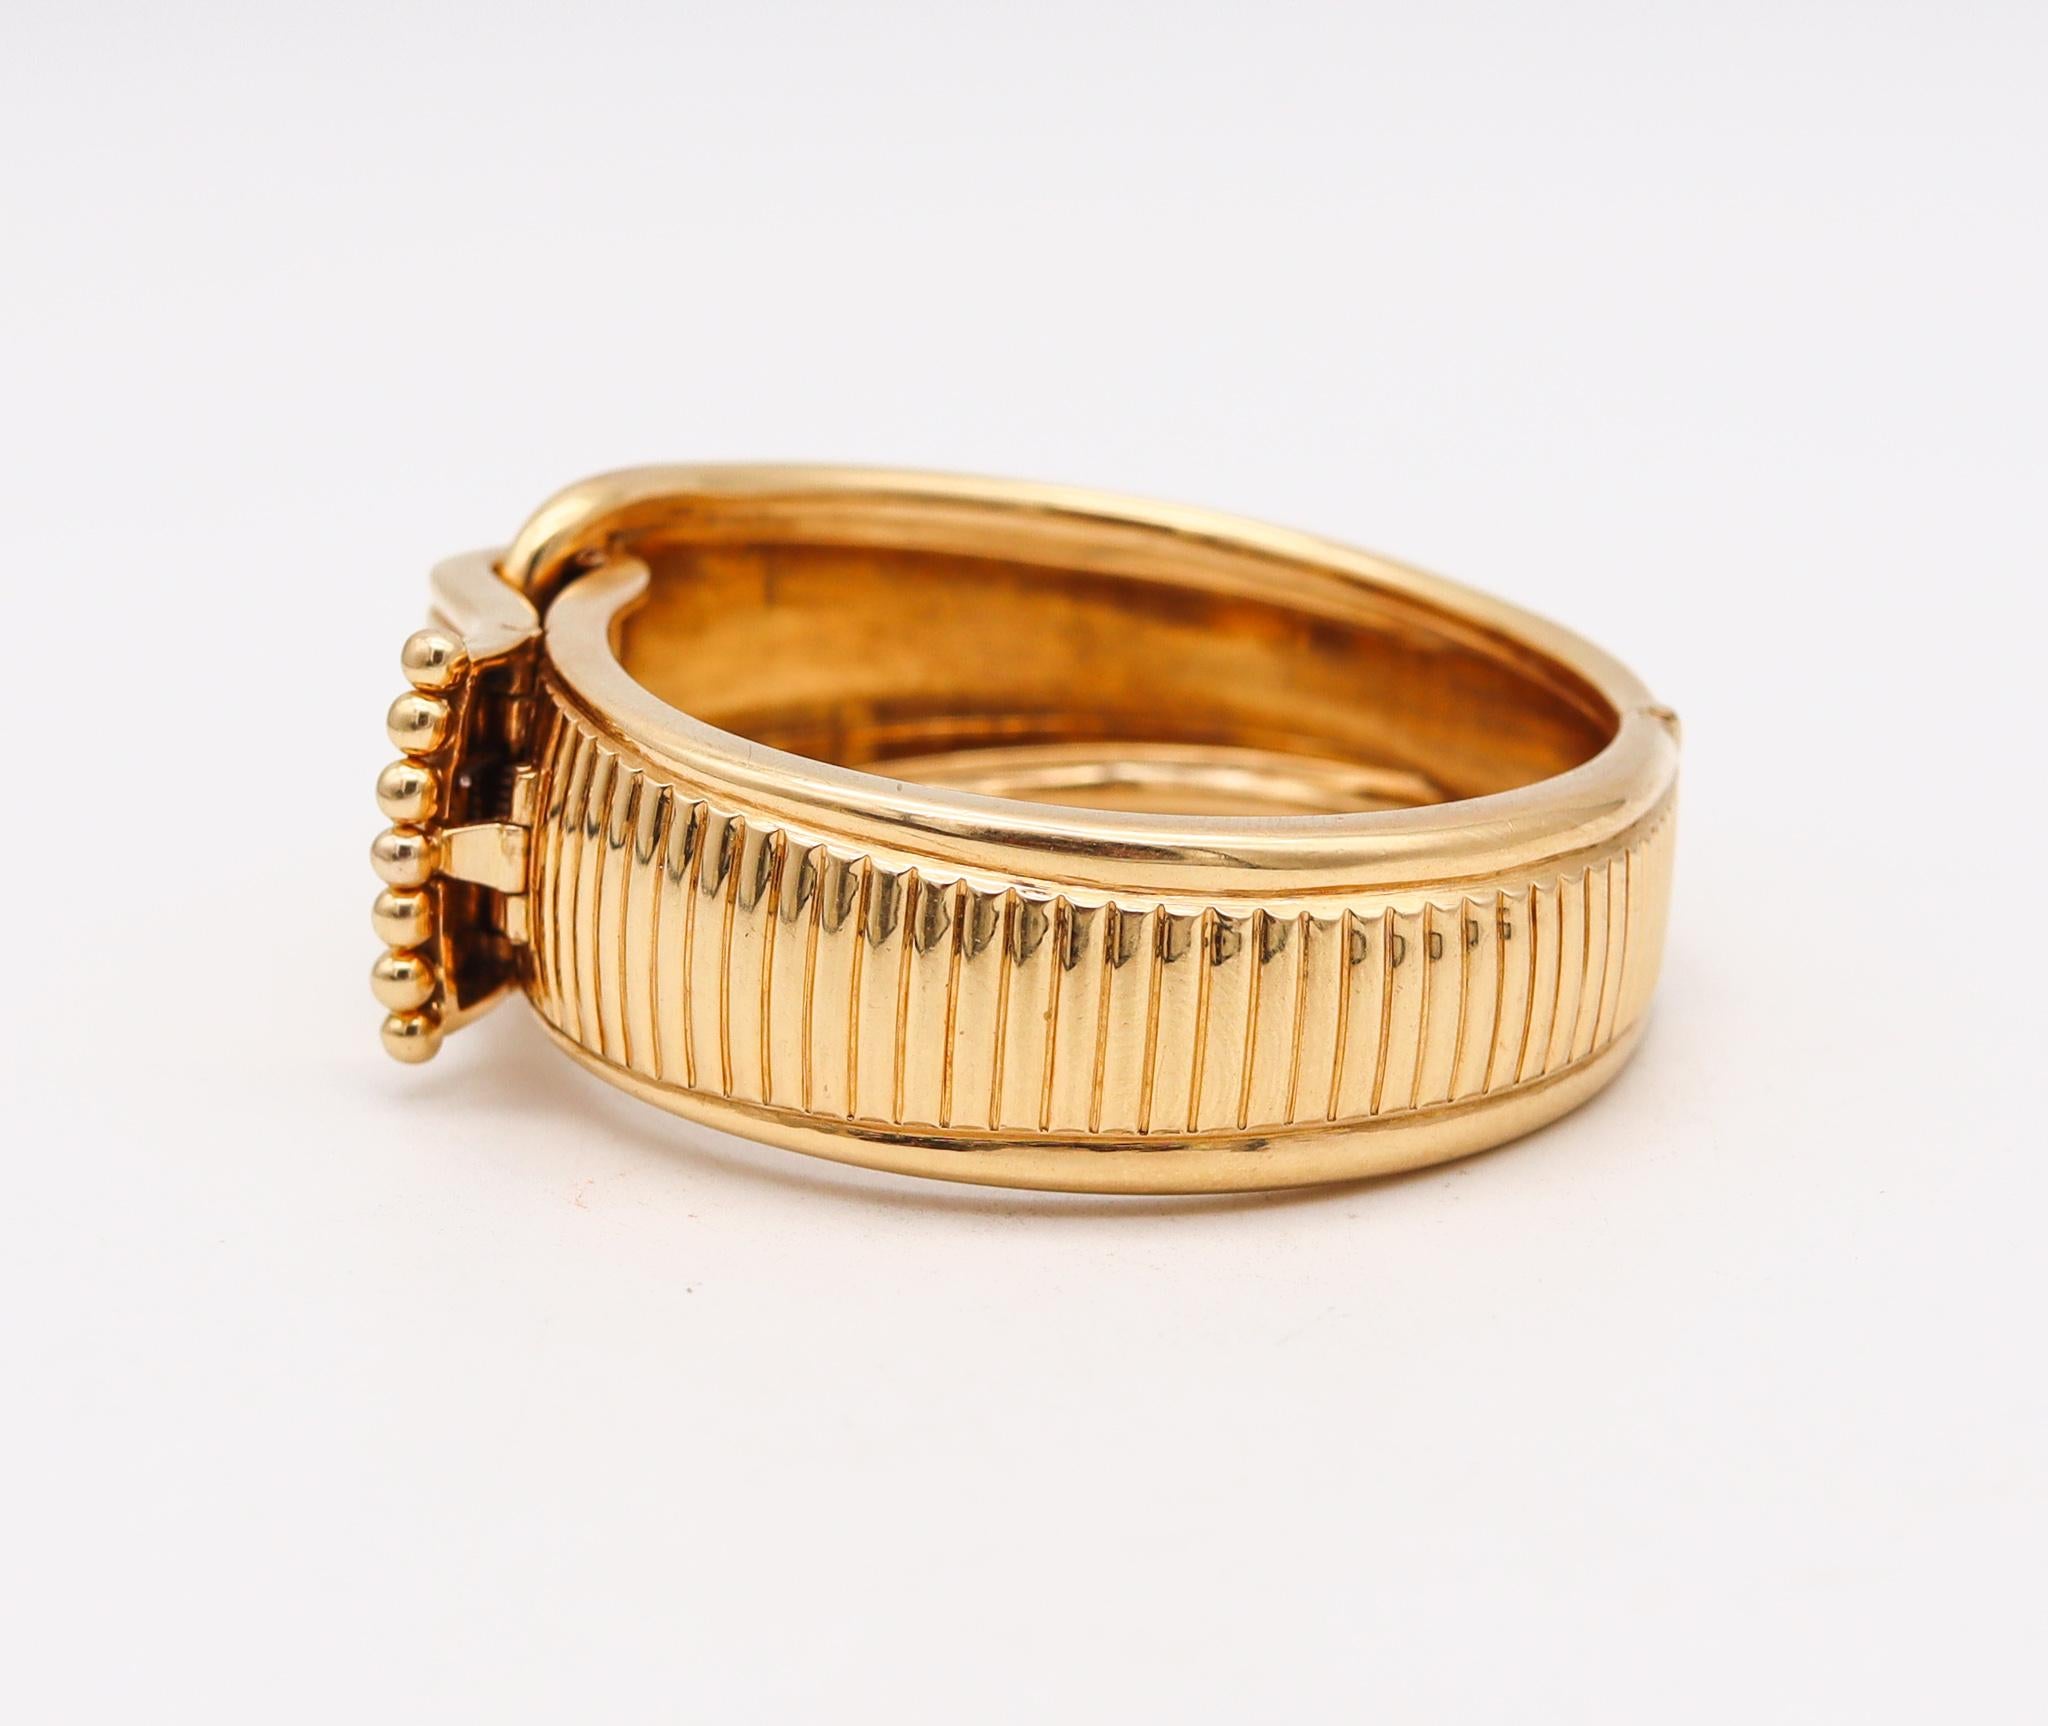 Art Deco 1930 Machine Age Geometric Bangle Bracelet in Solid 18Kt Yellow Gold For Sale 2